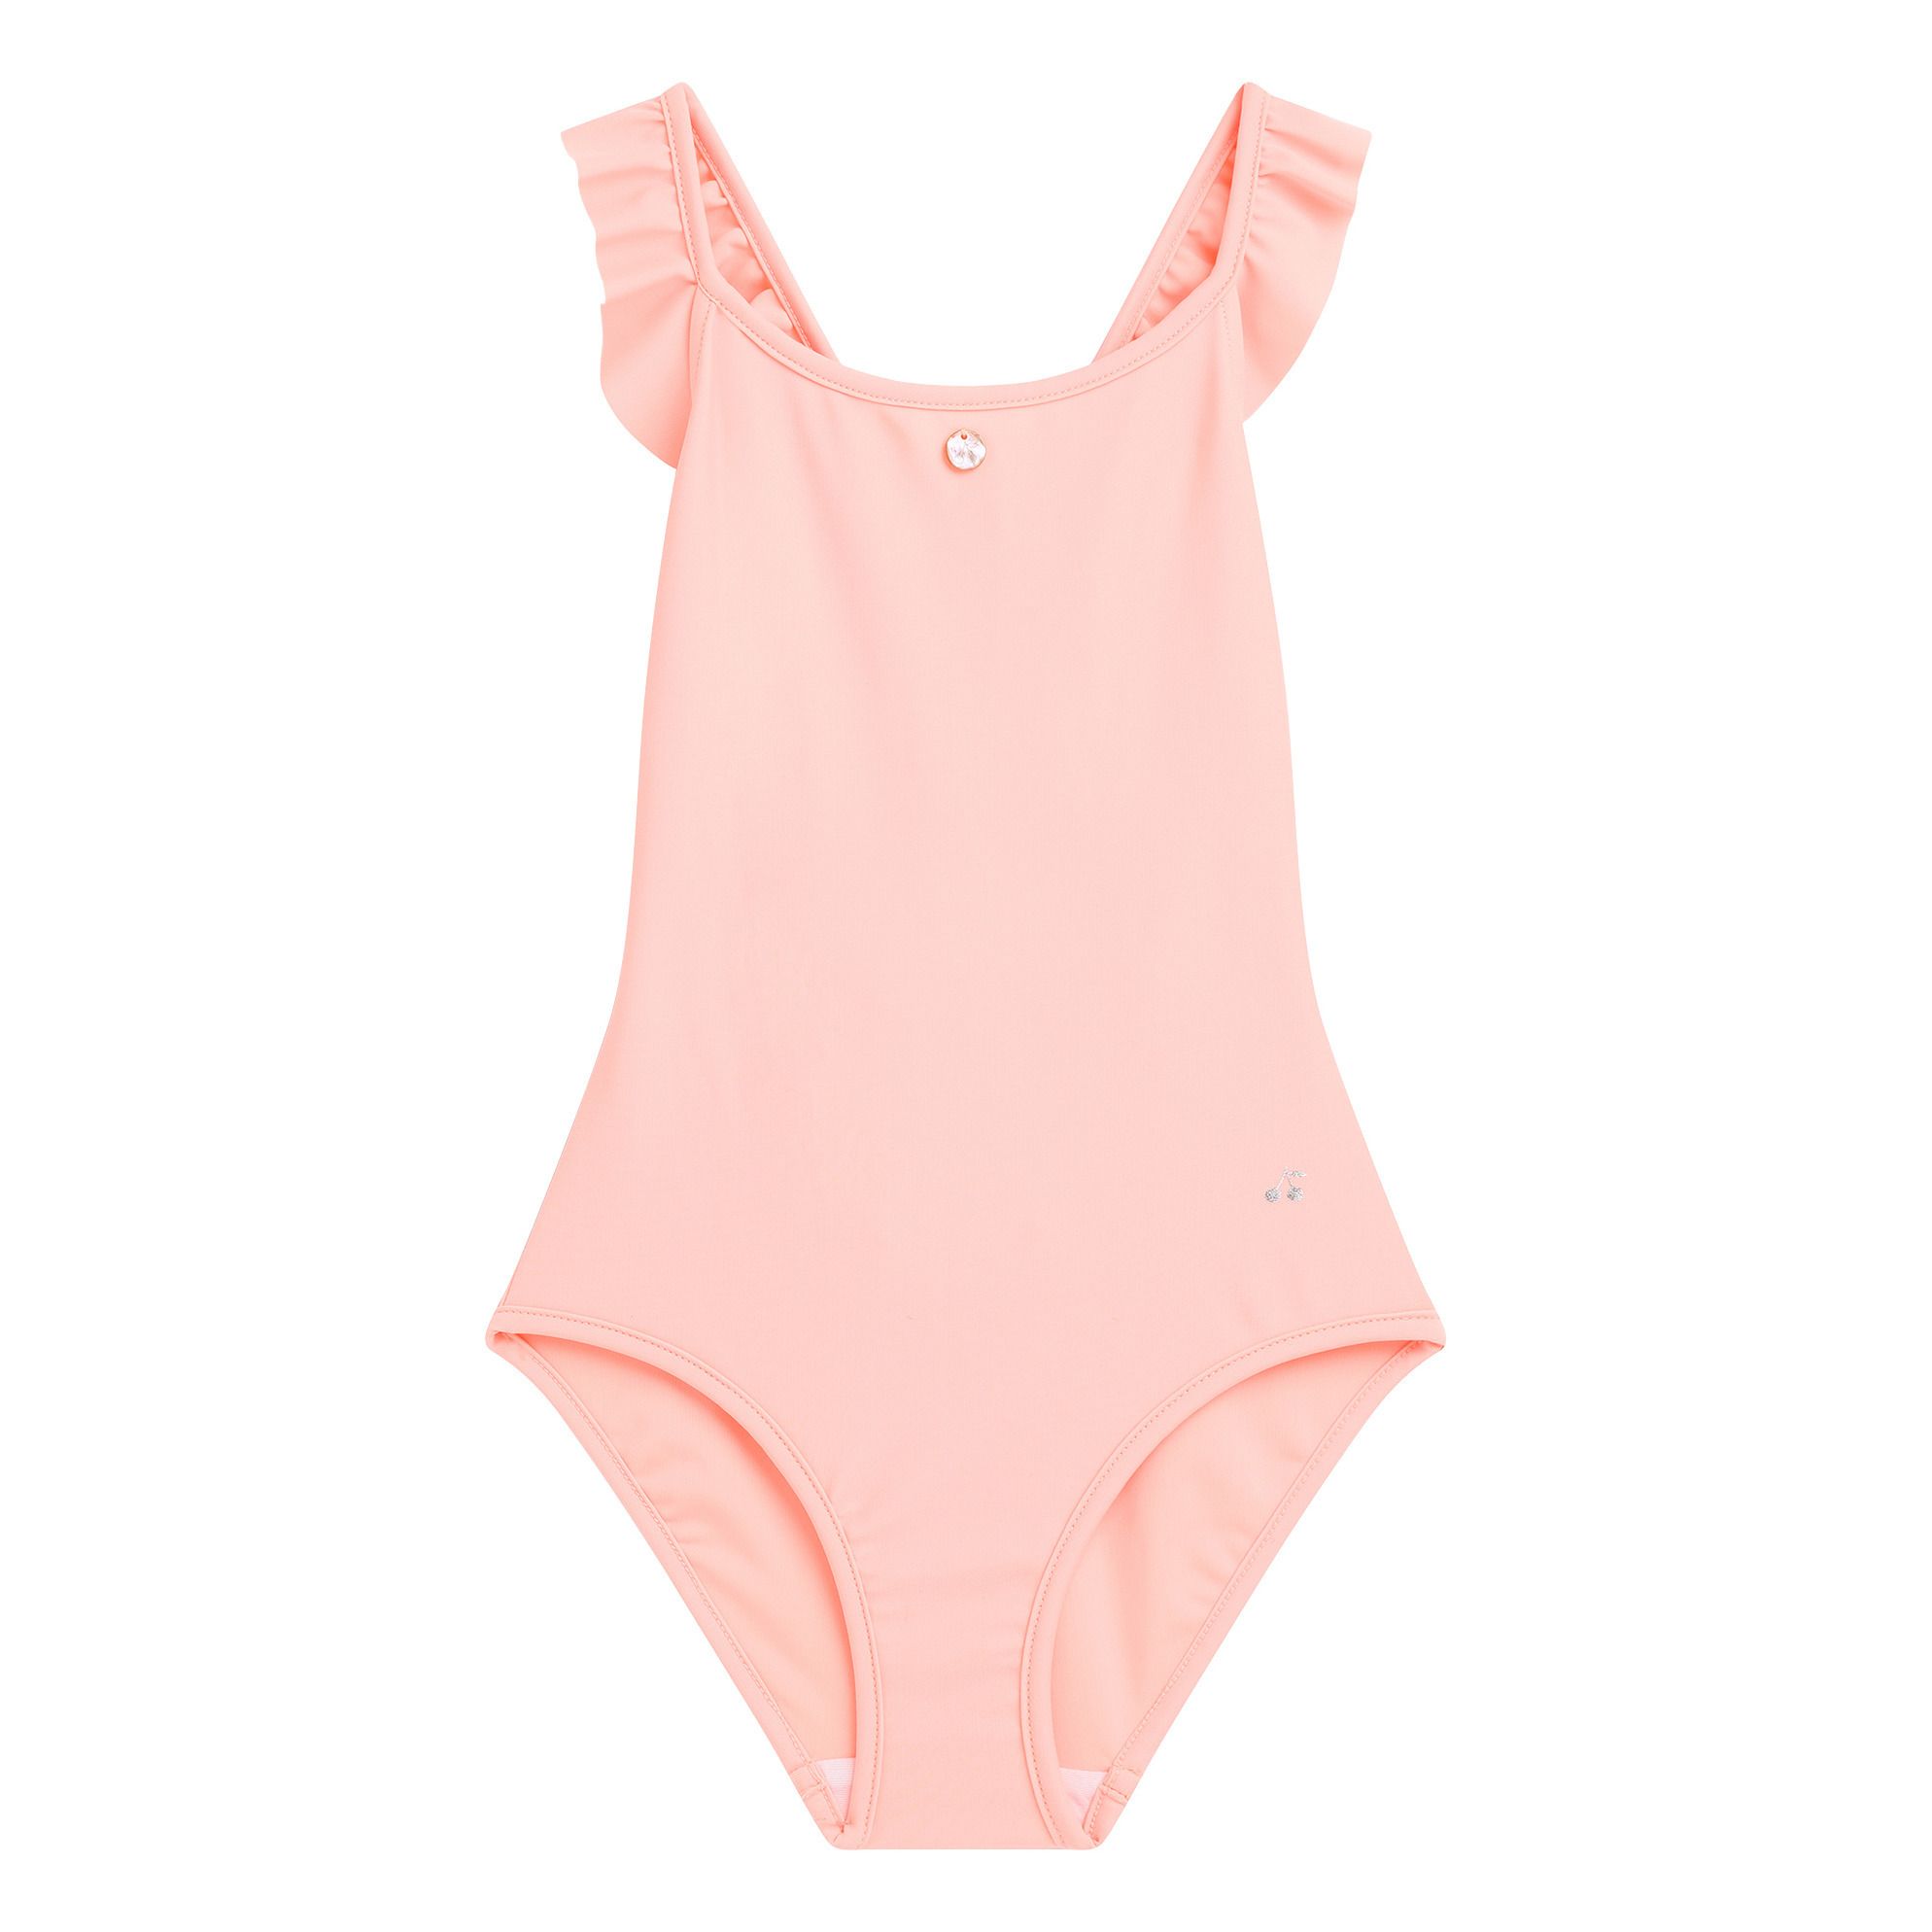 Bonpoint - One-piece Ruffles Swimsuit - Peach | Smallable